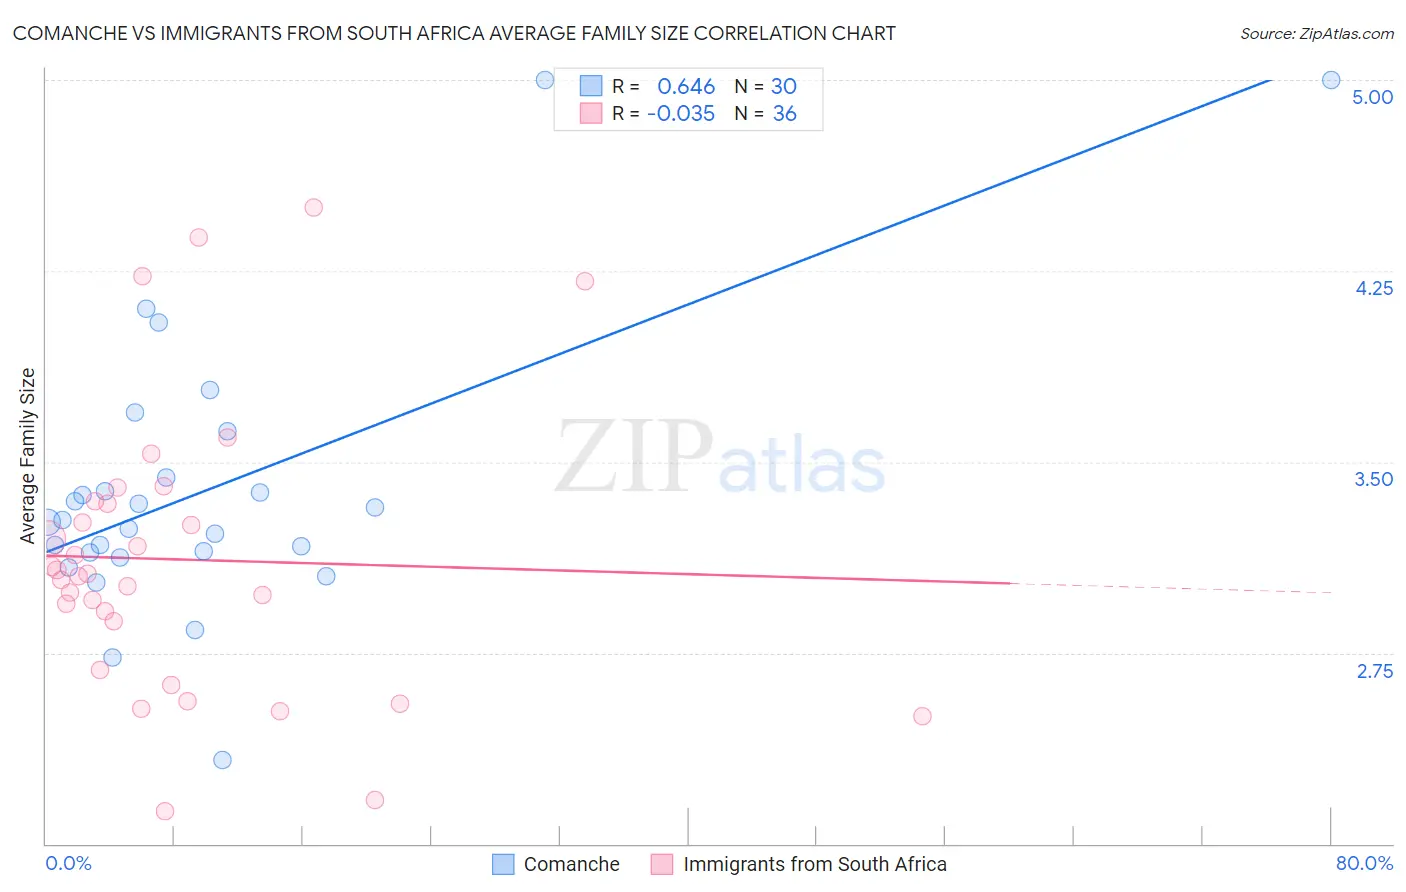 Comanche vs Immigrants from South Africa Average Family Size